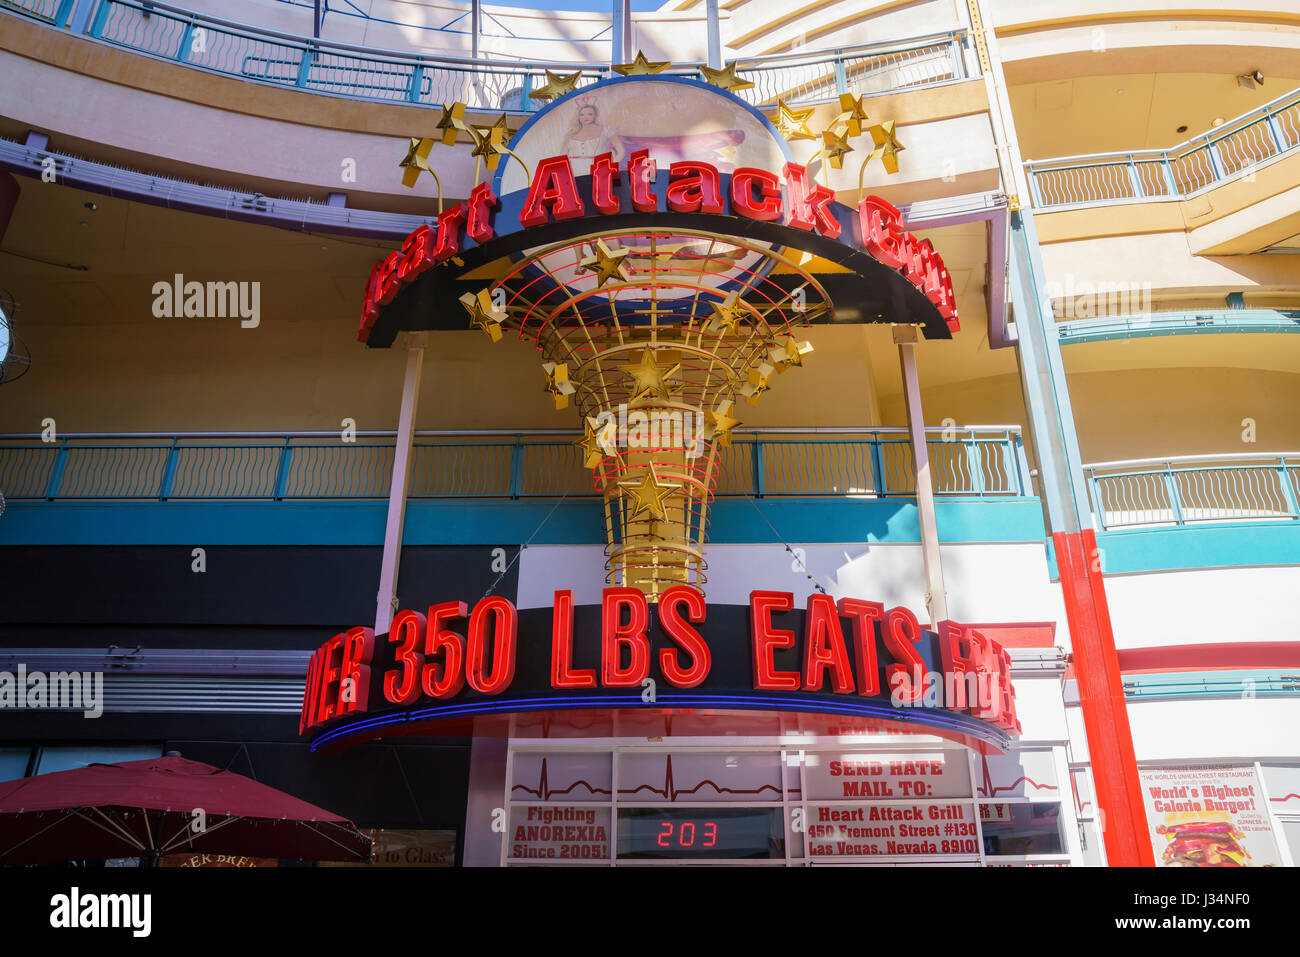 Las Vegas, APR 29: The special Heart Attack Grill restaurant on APR 29 ...